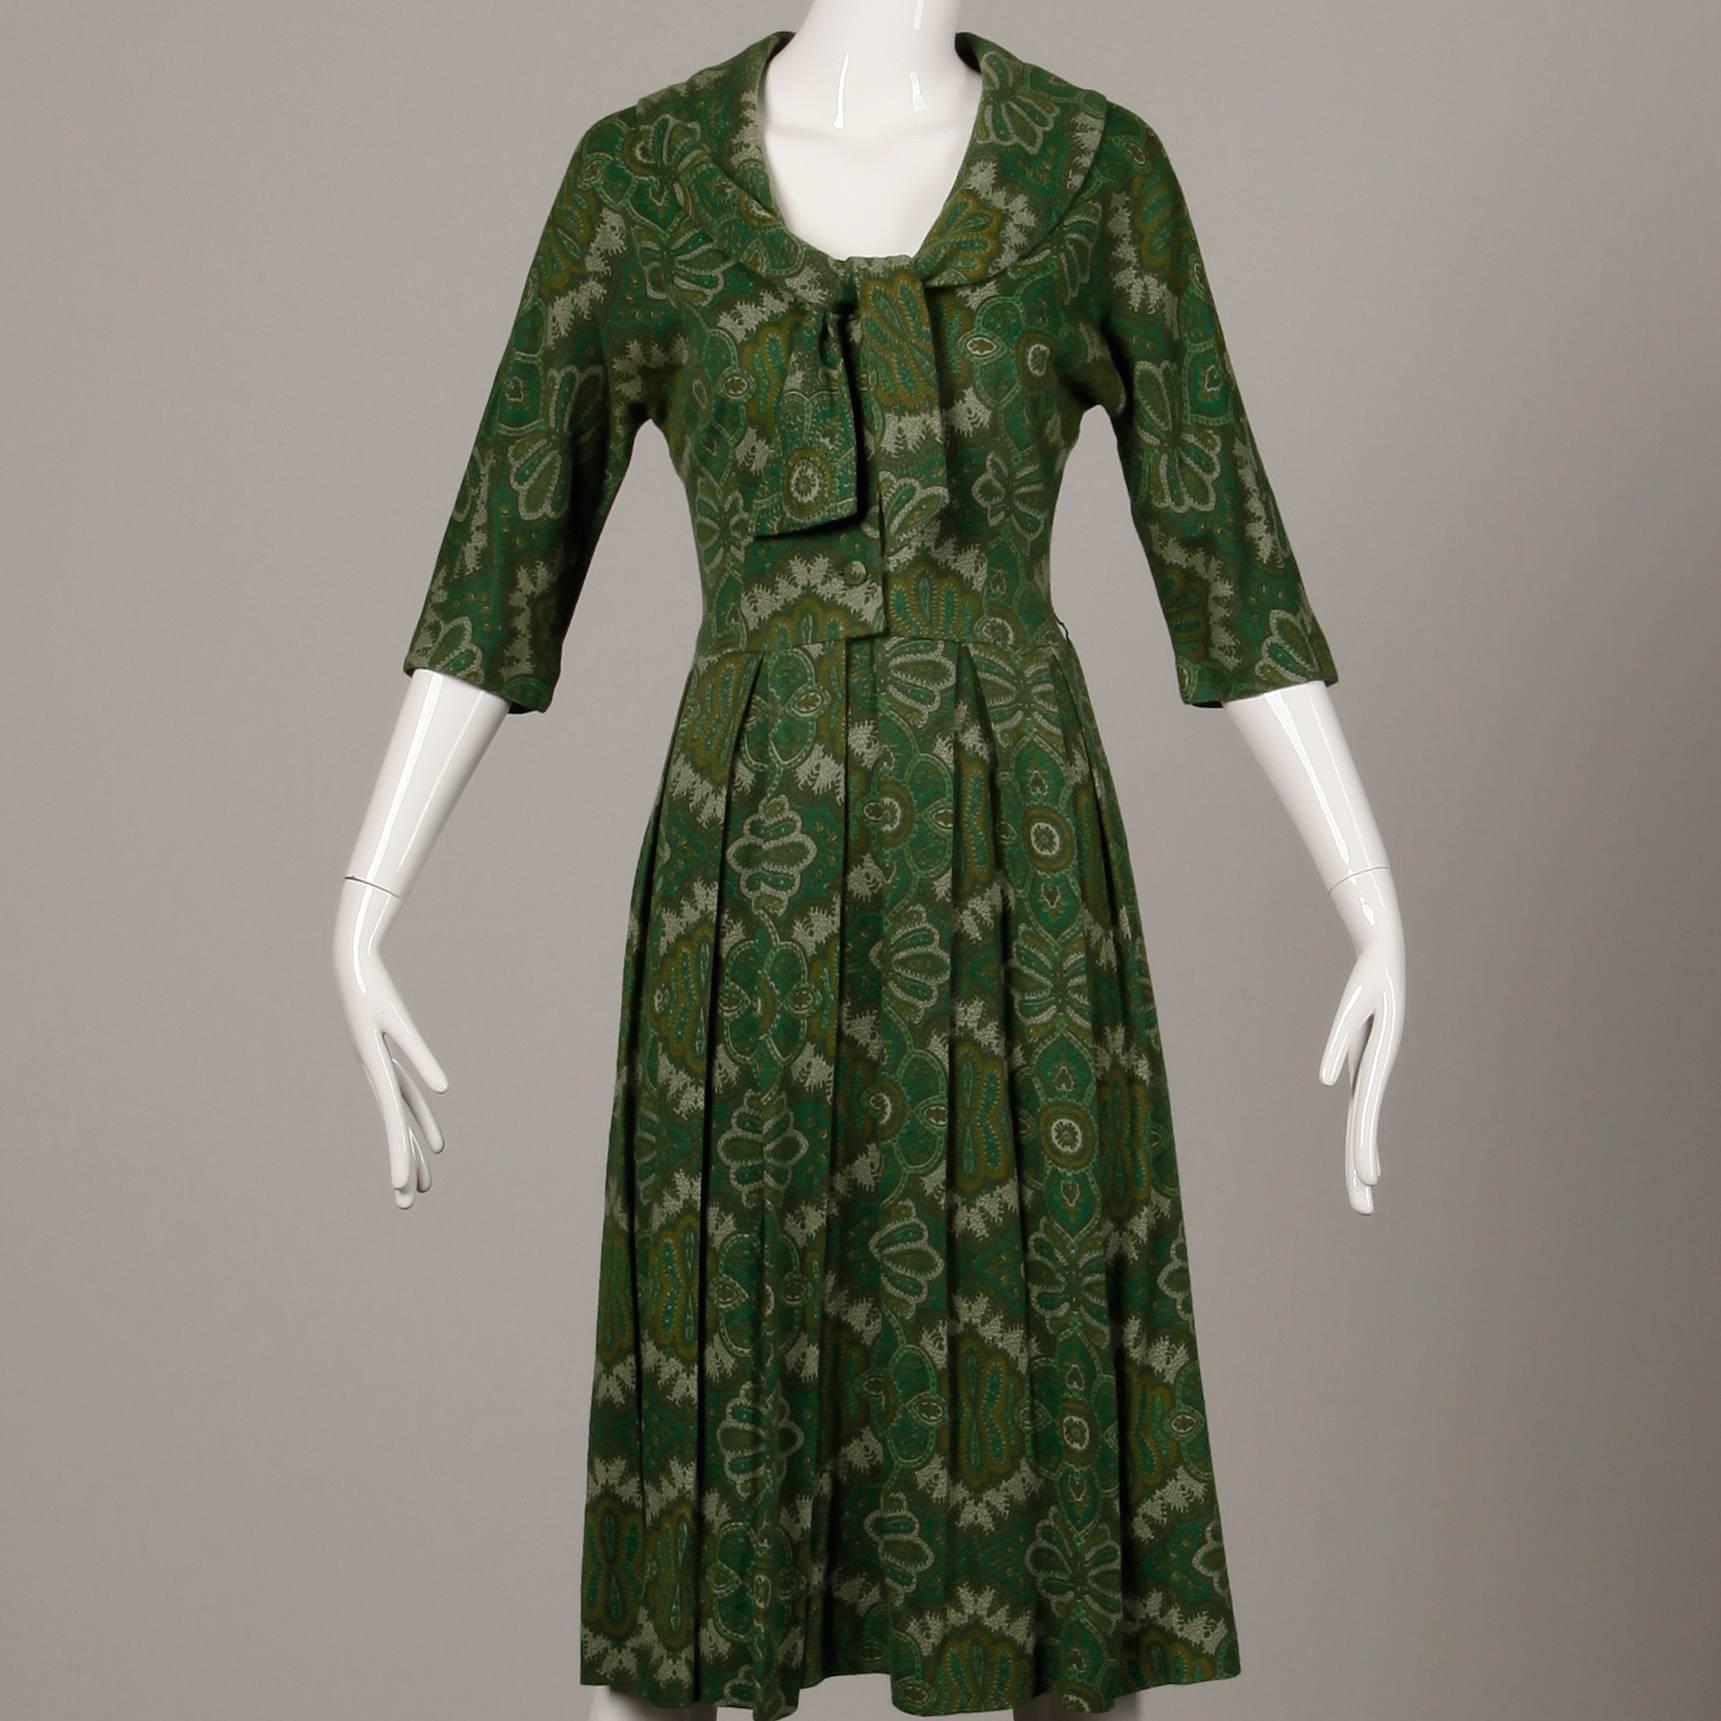 Vintage 1950s Jerry Gilden green paisley wool day dress with an ascot bow tie, 3/4 length sleeves, and pleated skirt. Unlined with front button, snap, hook and tie closure. Fits like a modern size small. The bust measures 36", waist